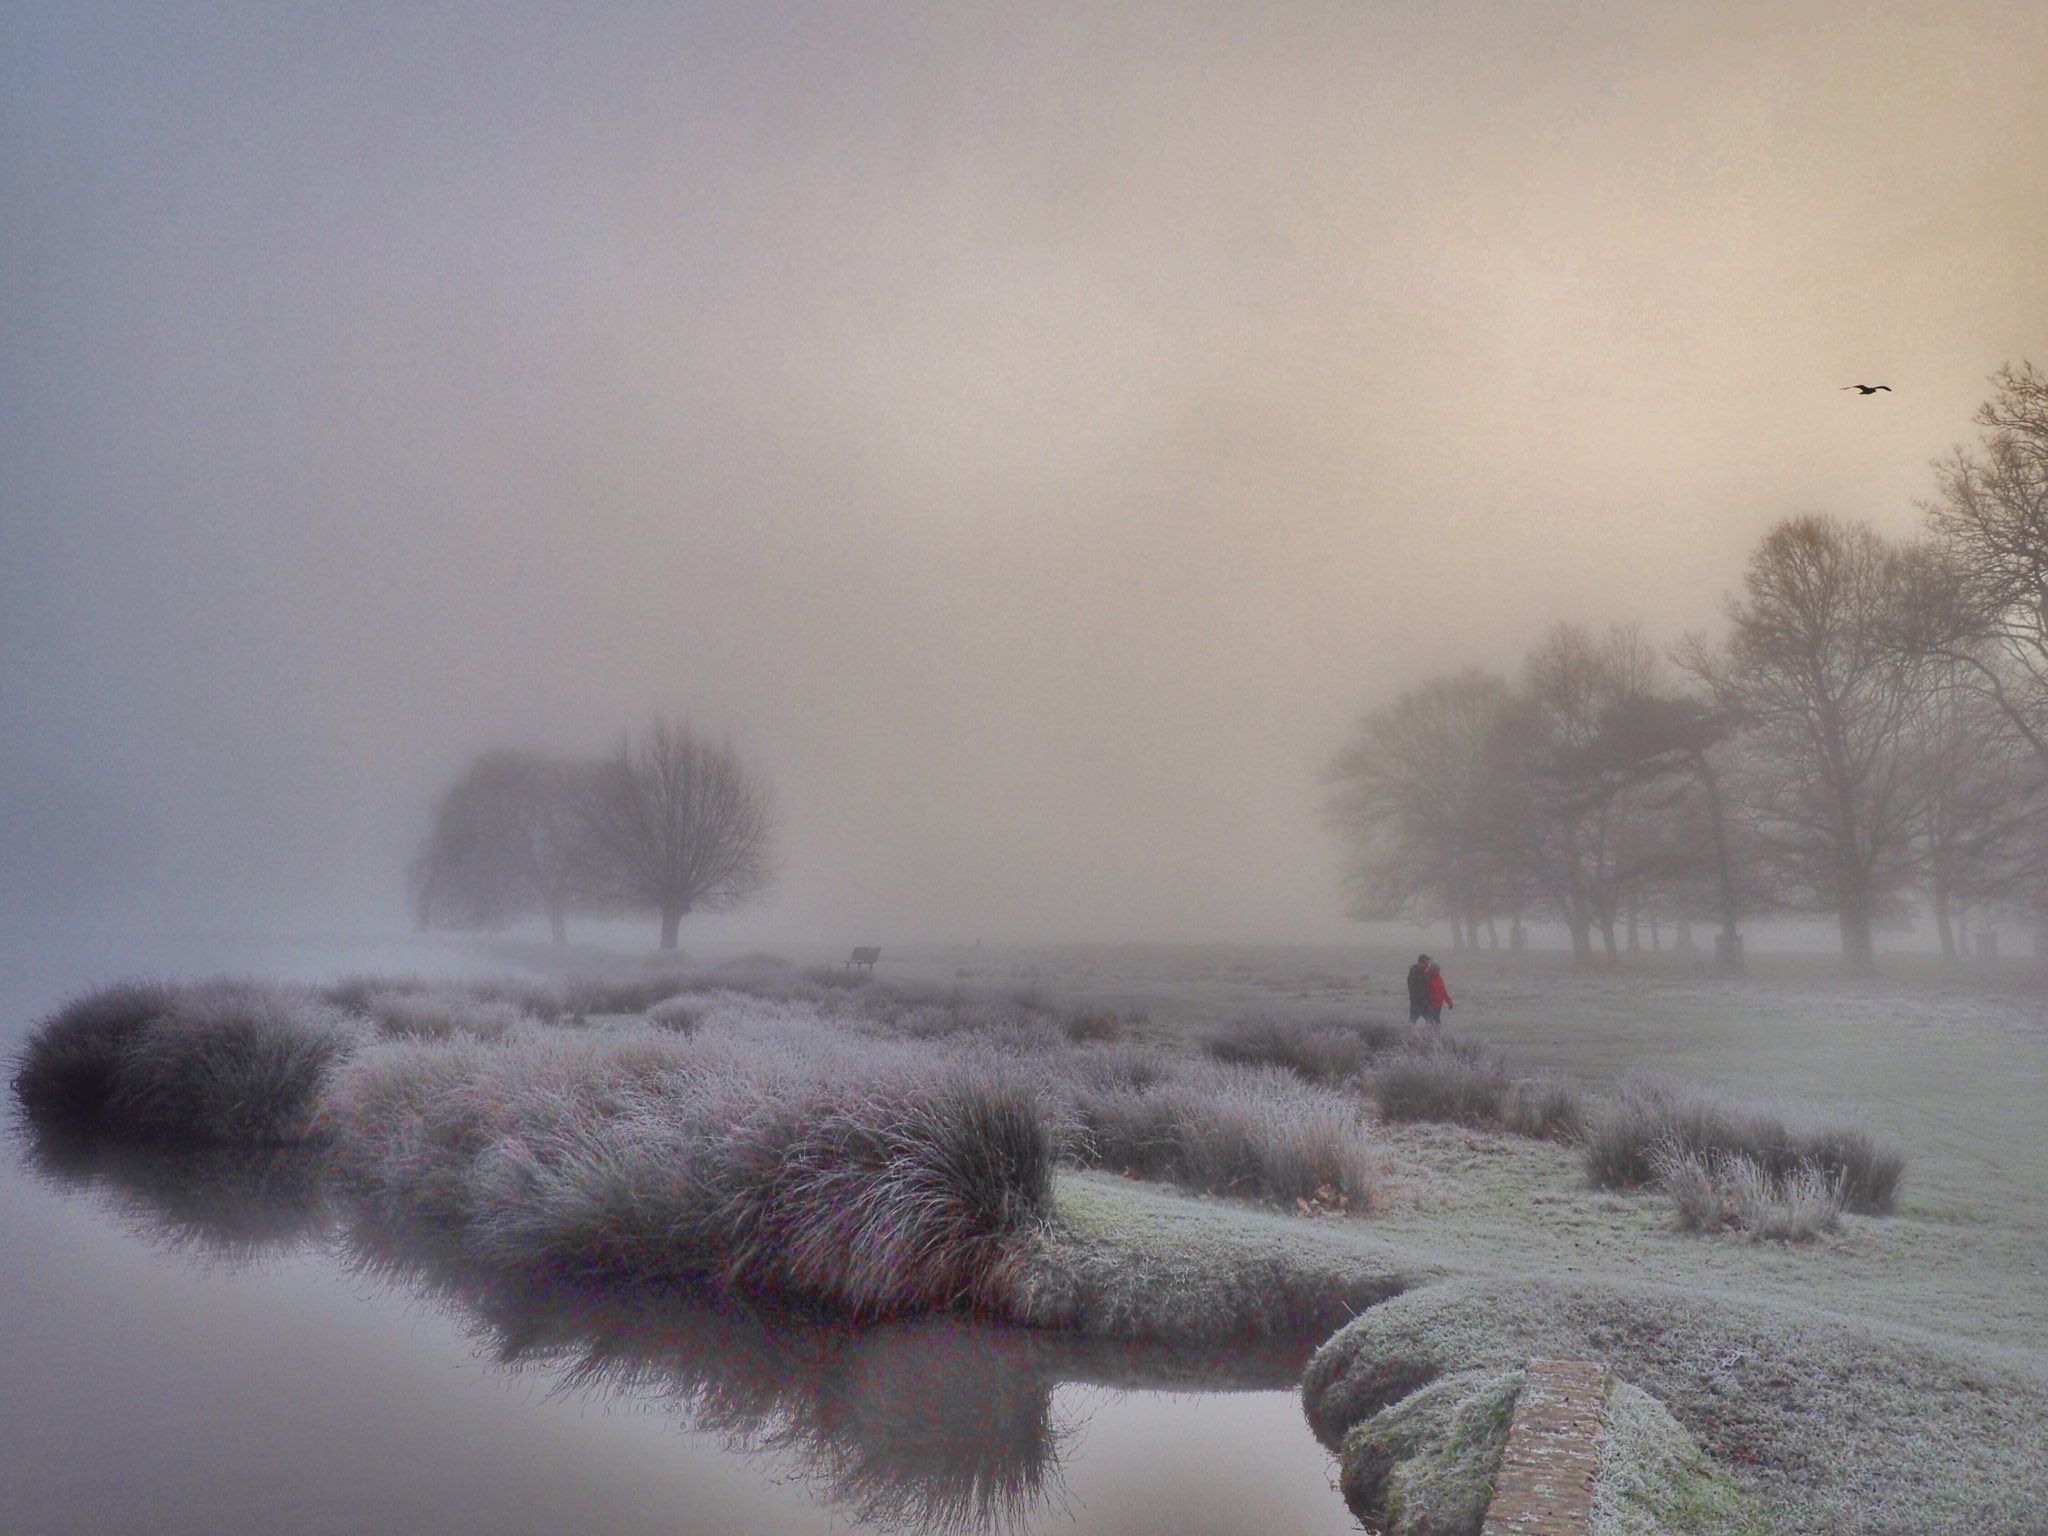 2nd Place A frosty foggy morning at the Leg of Mutton Pond Bushy Park Teddington by Ruth Wadey @ruths_gallery